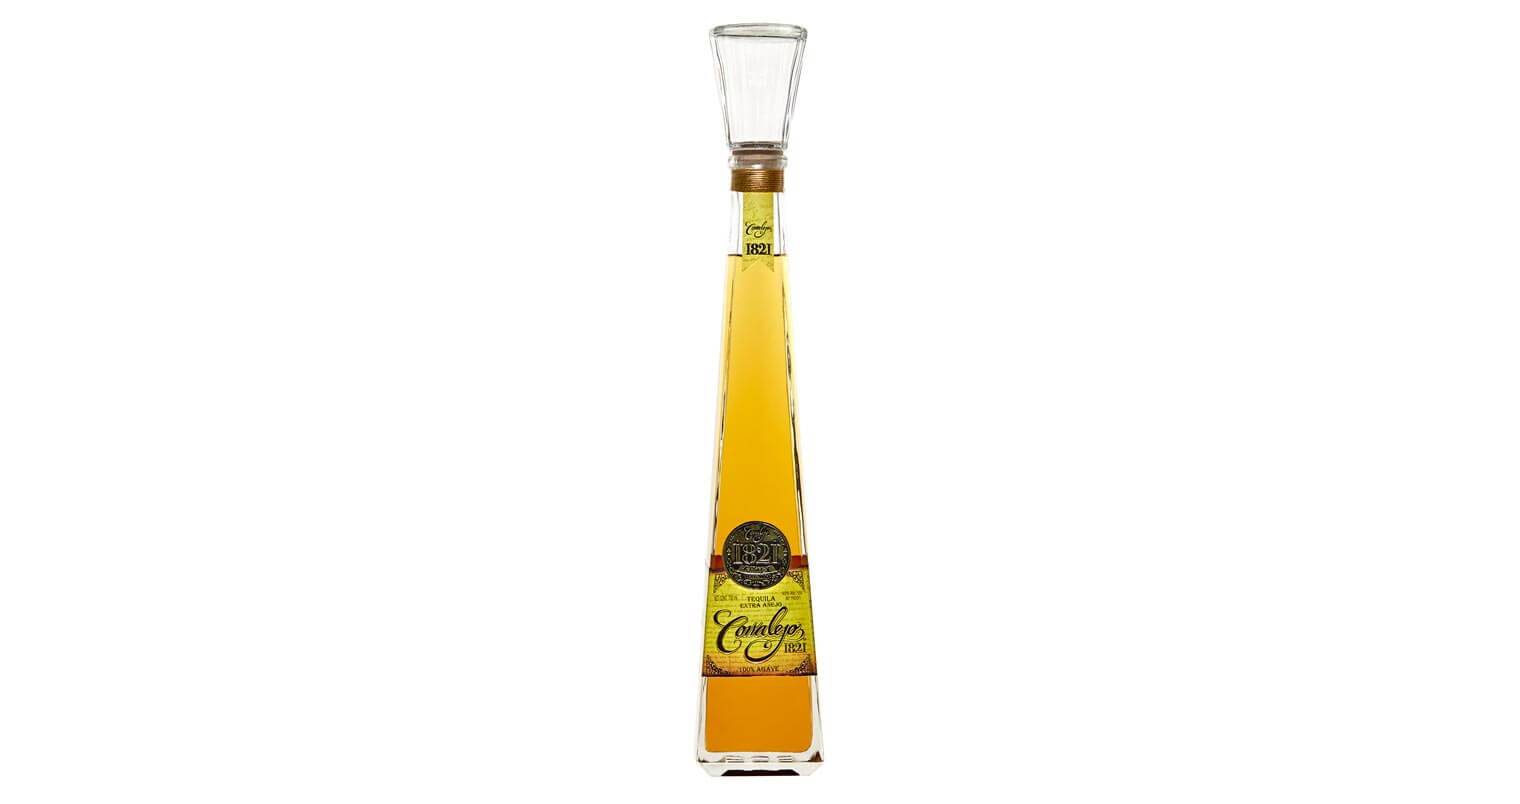 Tequila Corralejo Releases 1821 Extra Añejo for National Hispanic Heritage Month, featured image